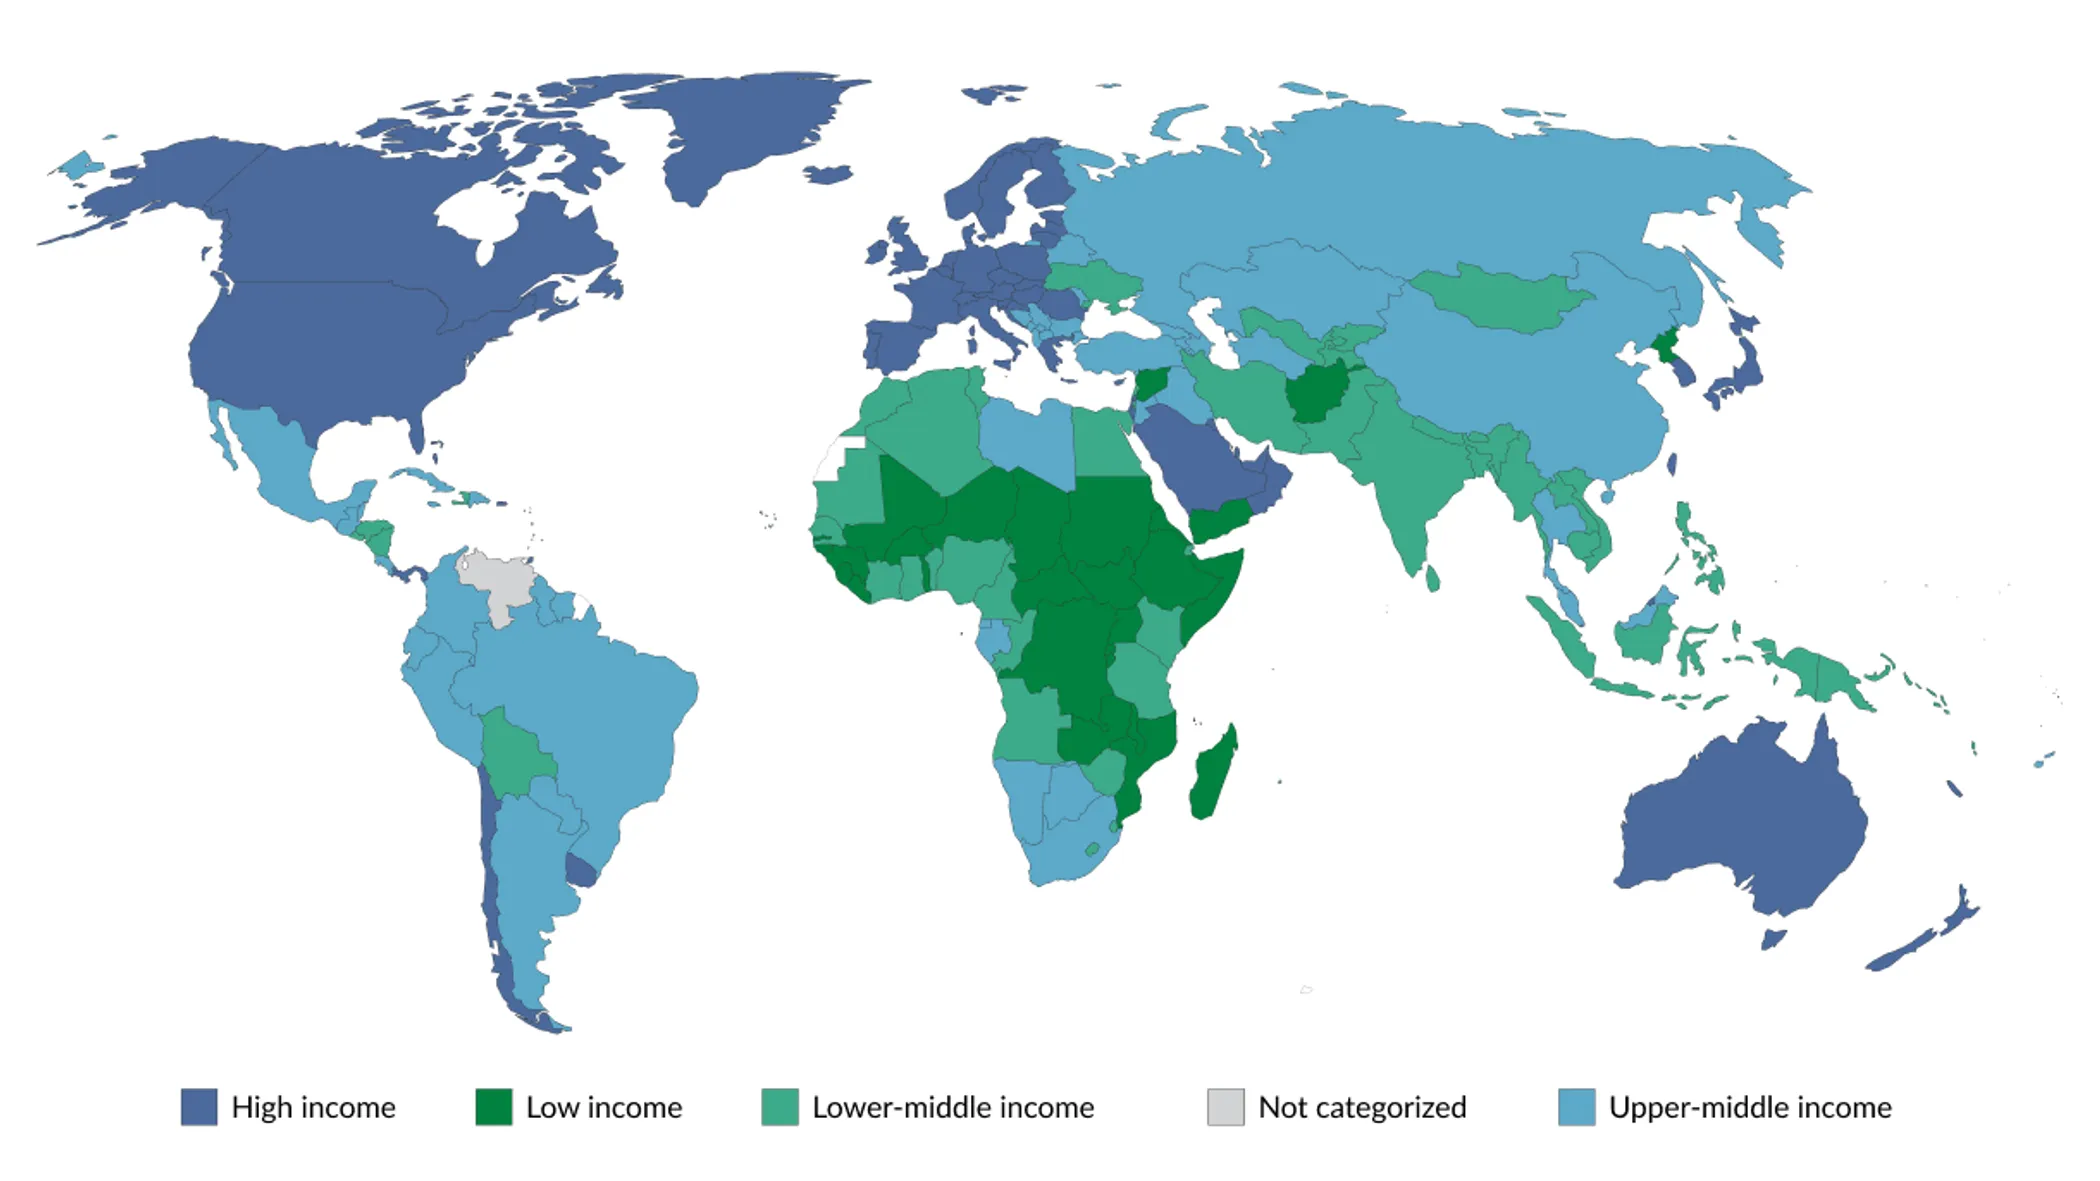 World Bank income groups in 2021 (Source: ourworldindata.org)